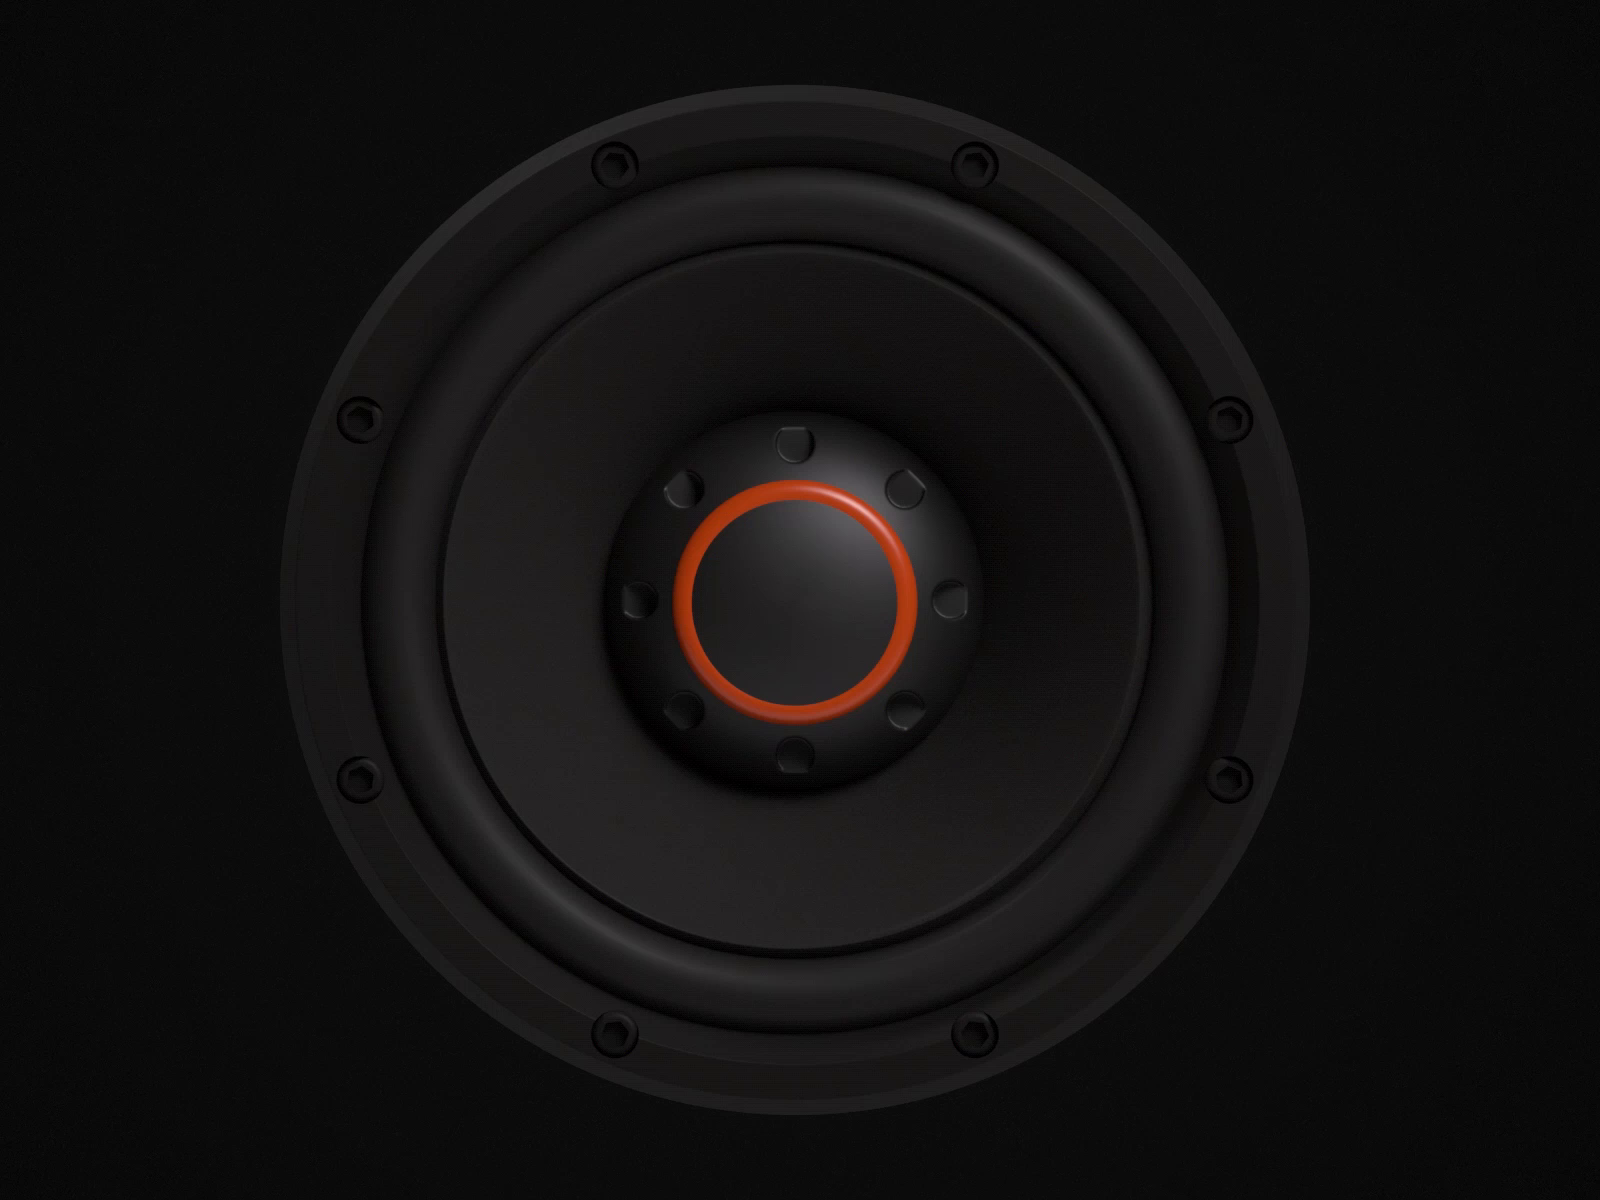 Dj Speakers Stock Photos and Images  123RF